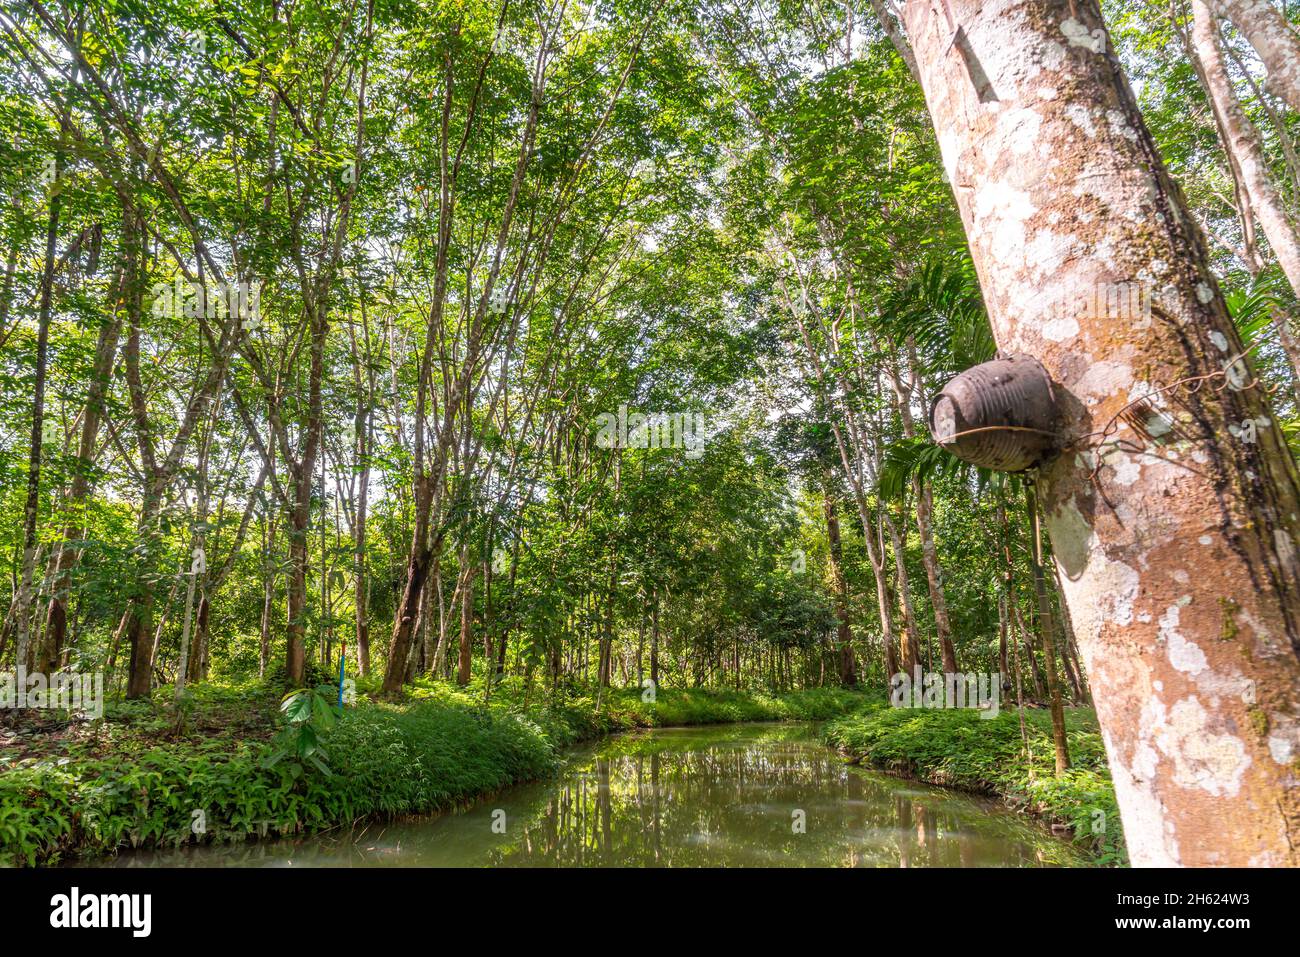 Rubber tree, Latex rubber, Plantation and tree rubber in southern Thailand Stock Photo